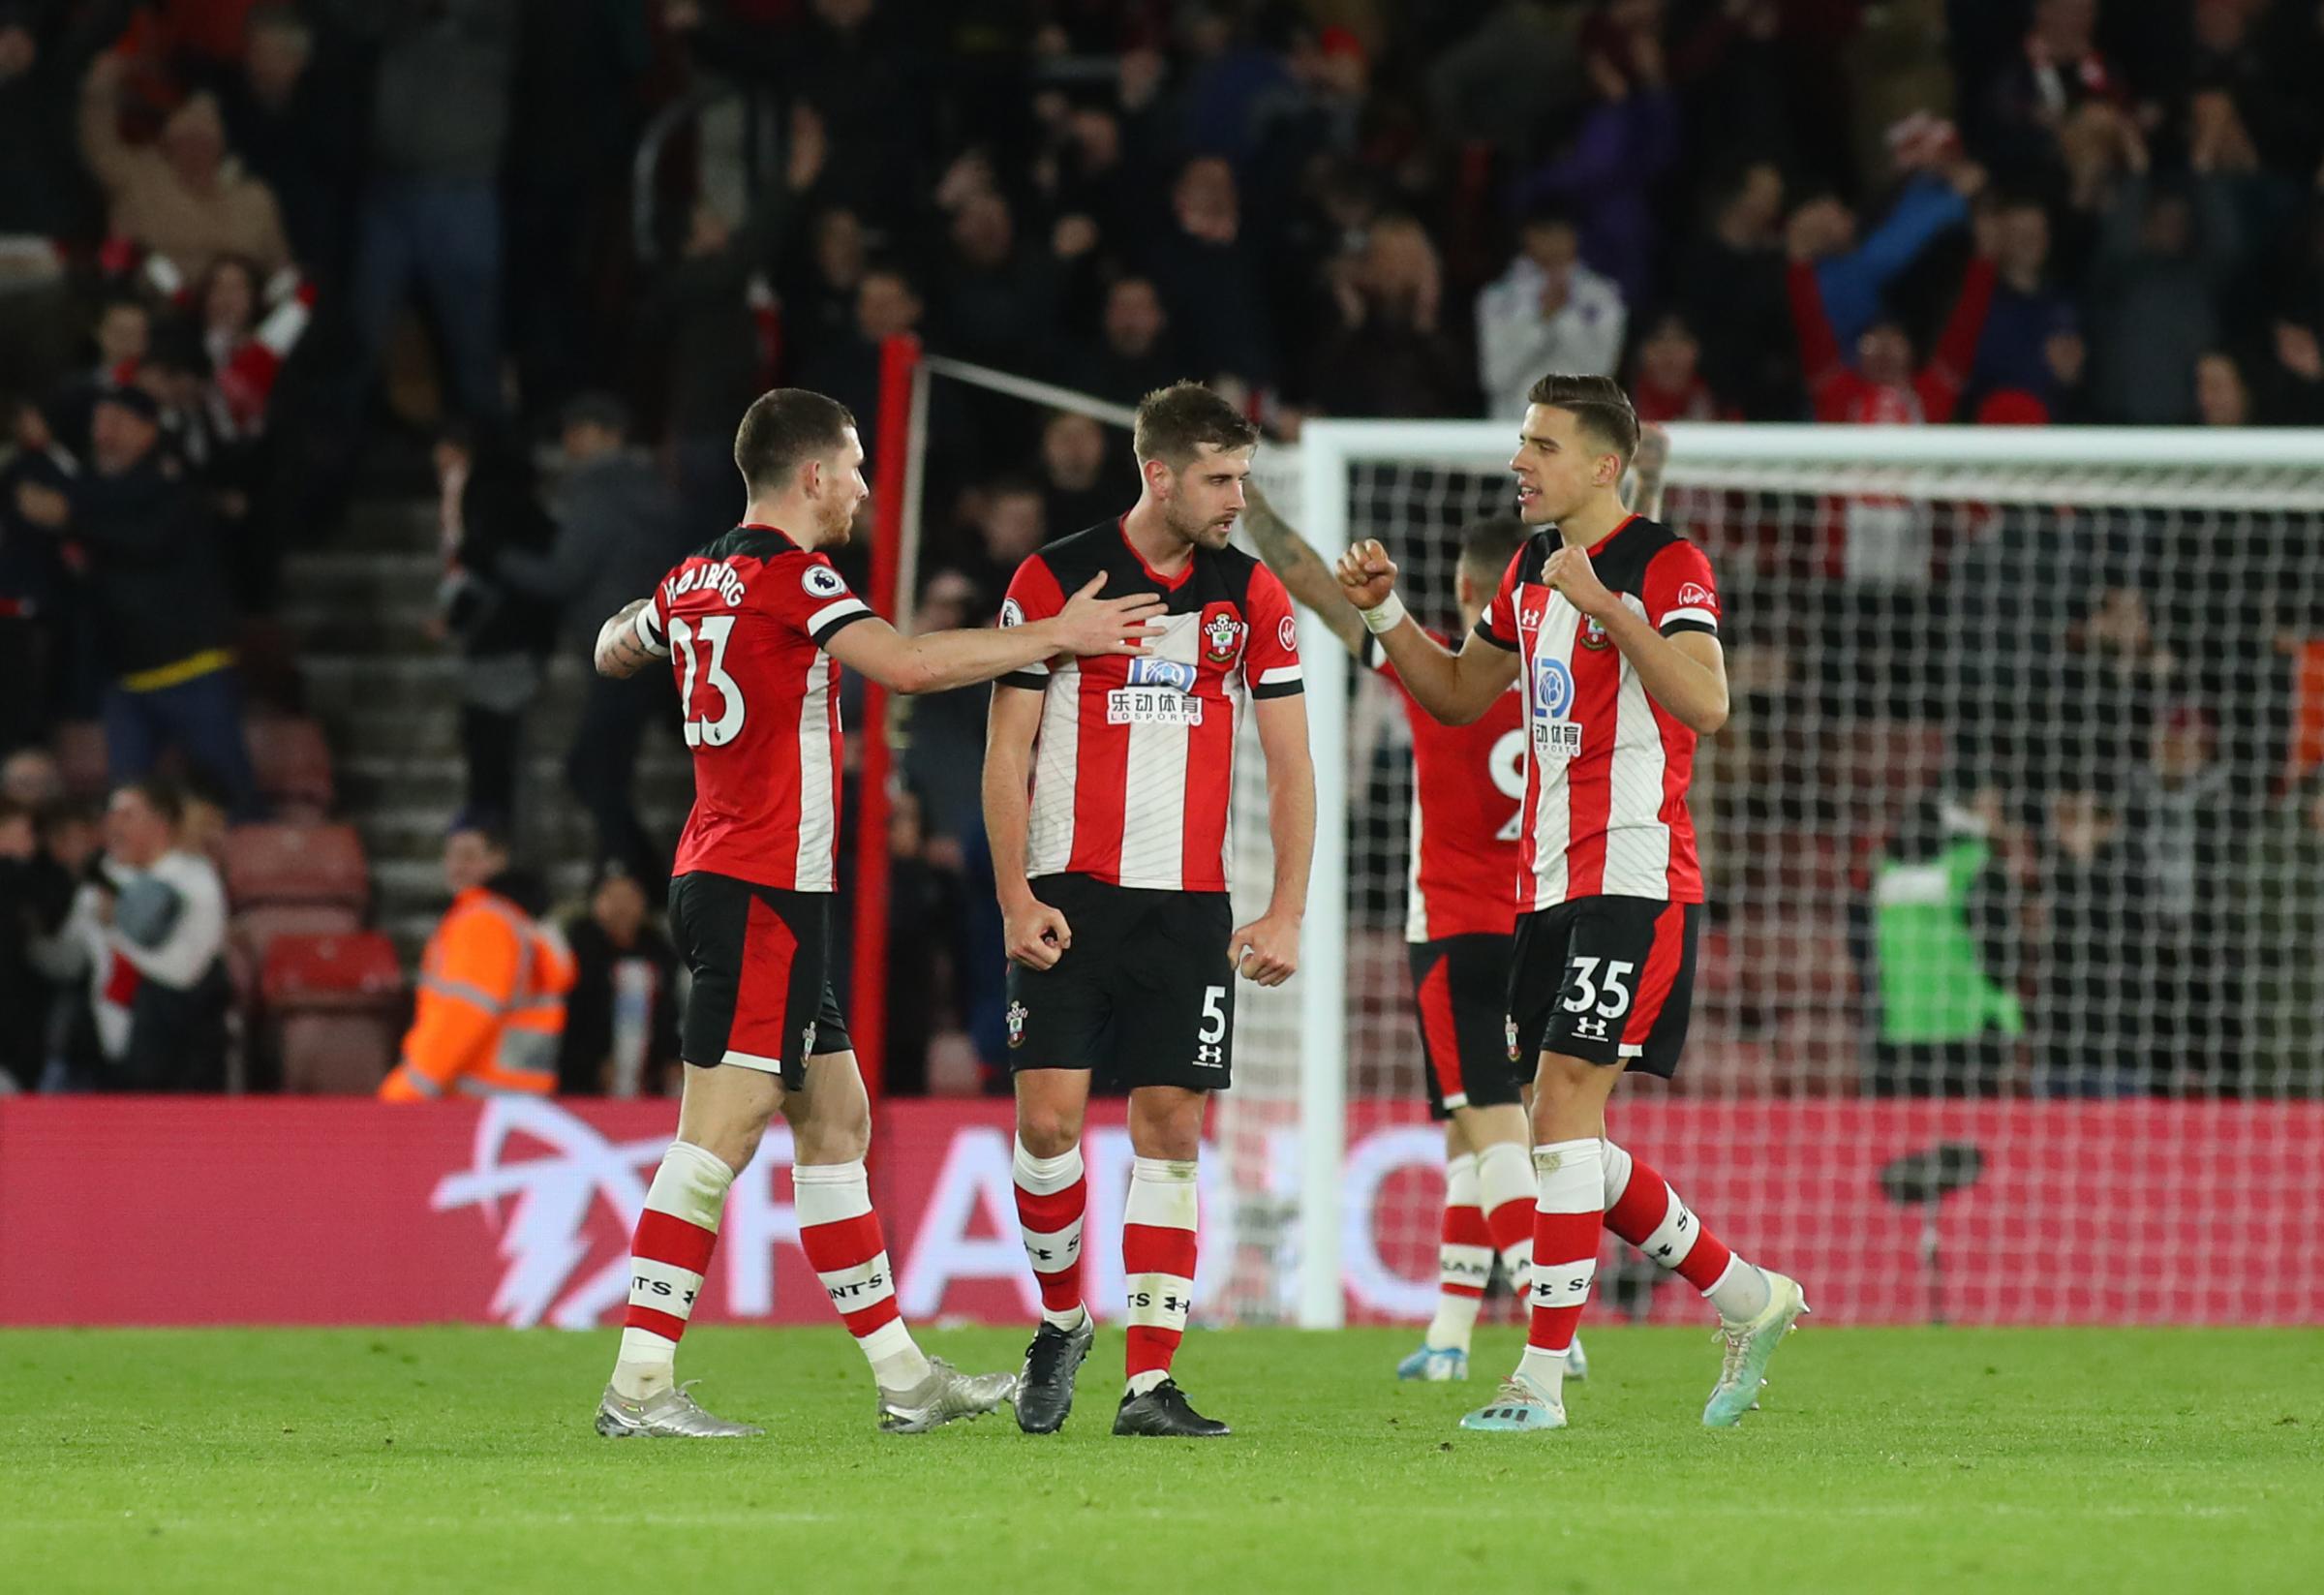 Southampton's players will train at home until next month